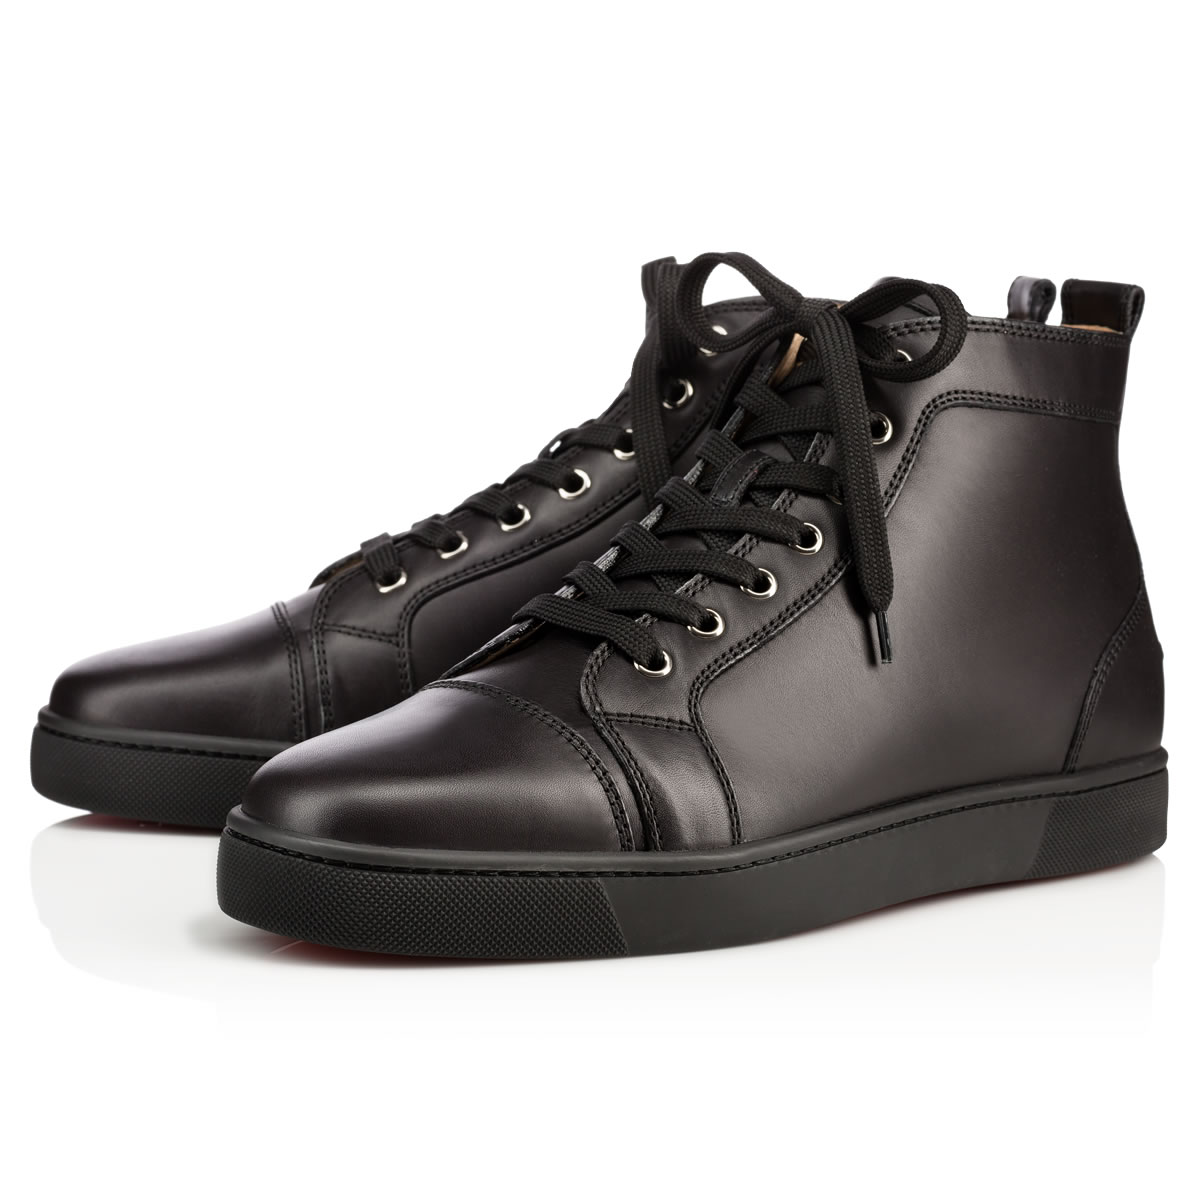 Christian Louboutin - Authenticated Louis Trainer - Leather Black Plain for Men, Very Good Condition